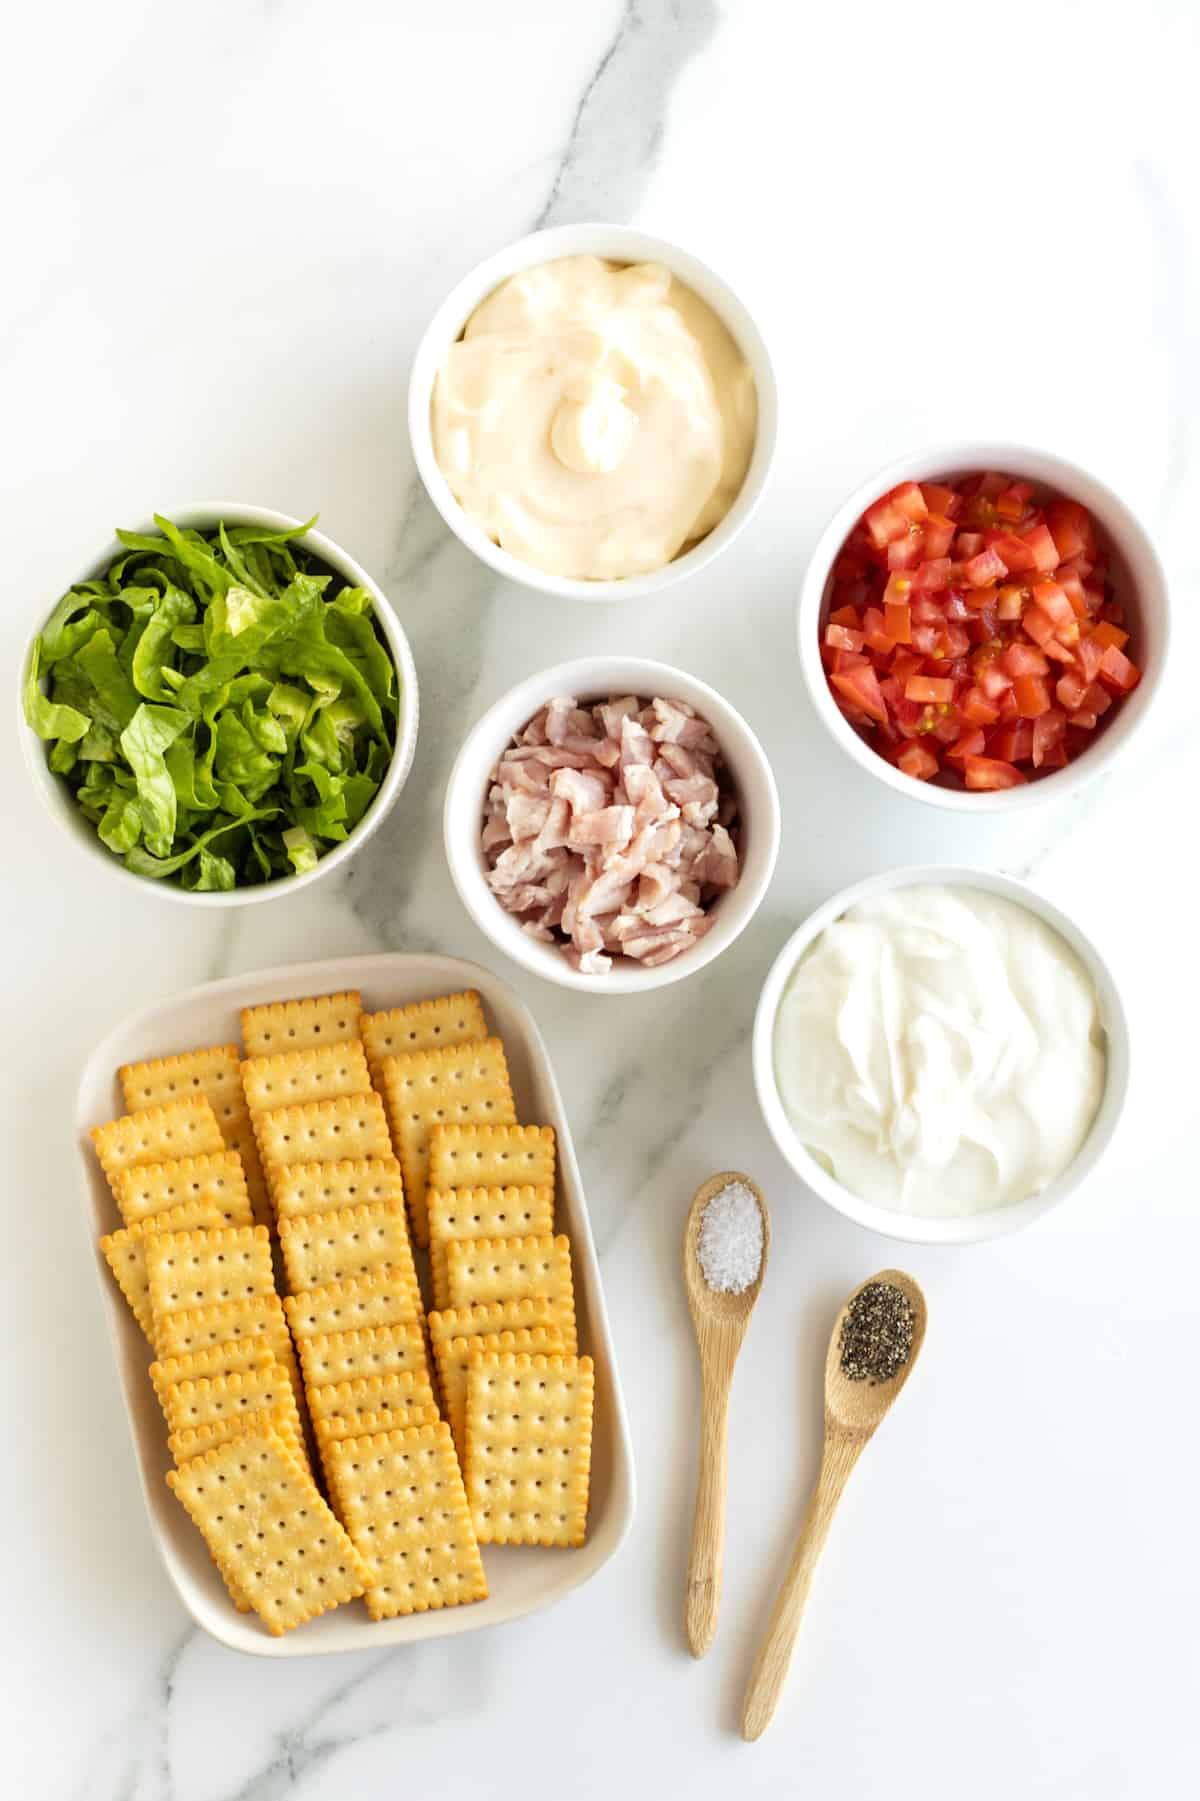 Bacon, romaine lettuce, sour cream, Roma tomatoes, mayonnaise and club crackers for a BLT dip.